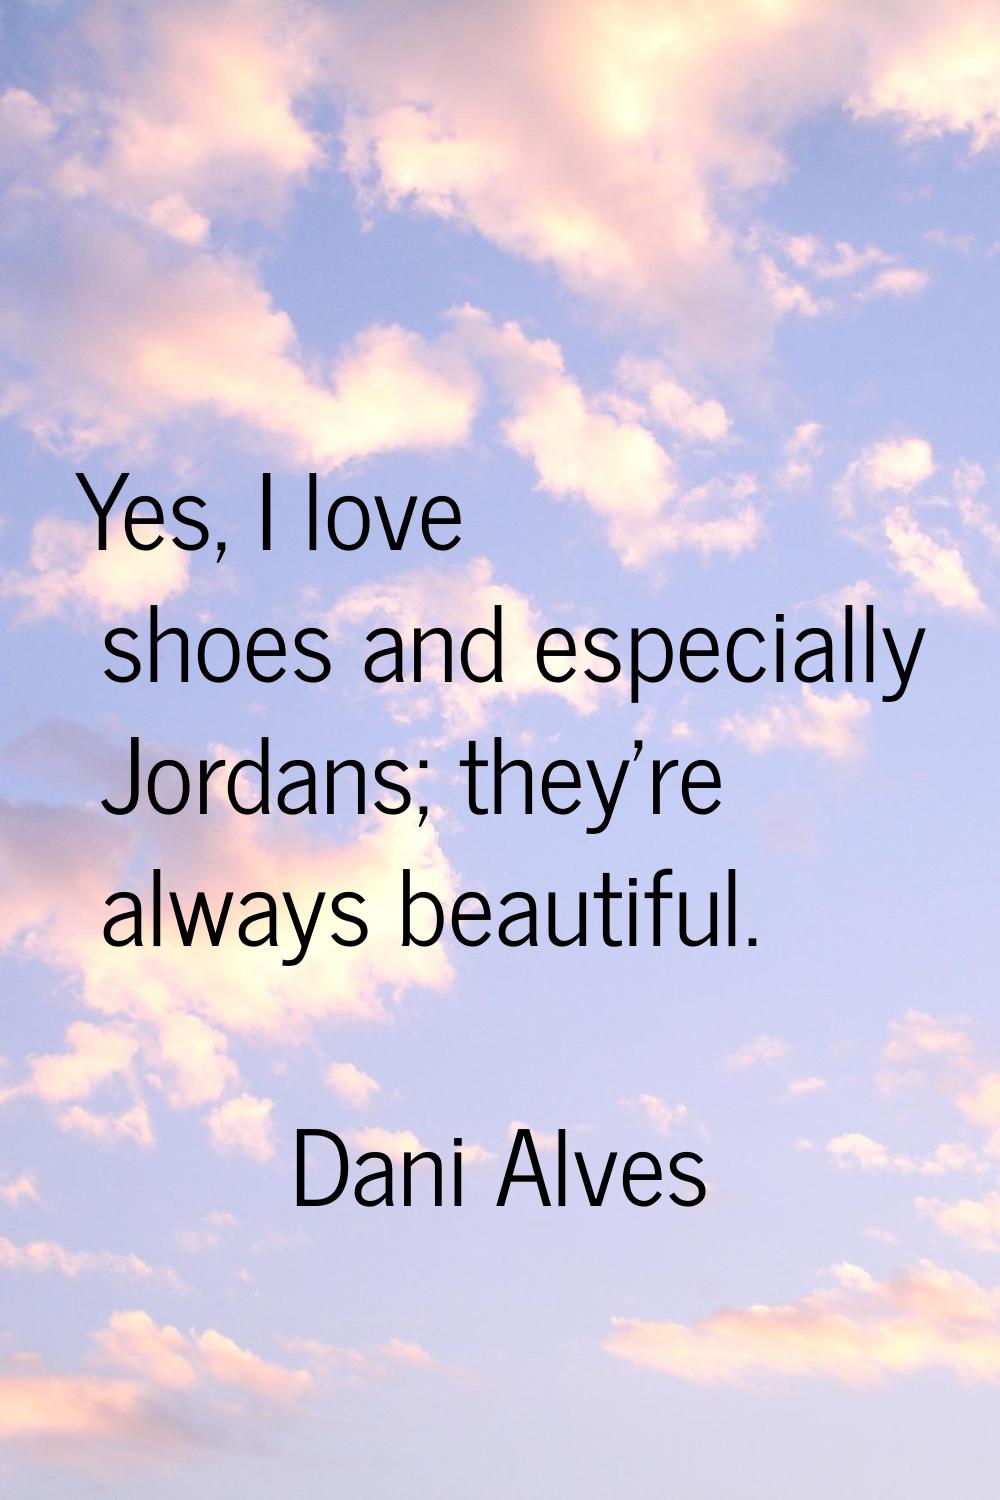 Yes, I love shoes and especially Jordans; they're always beautiful.